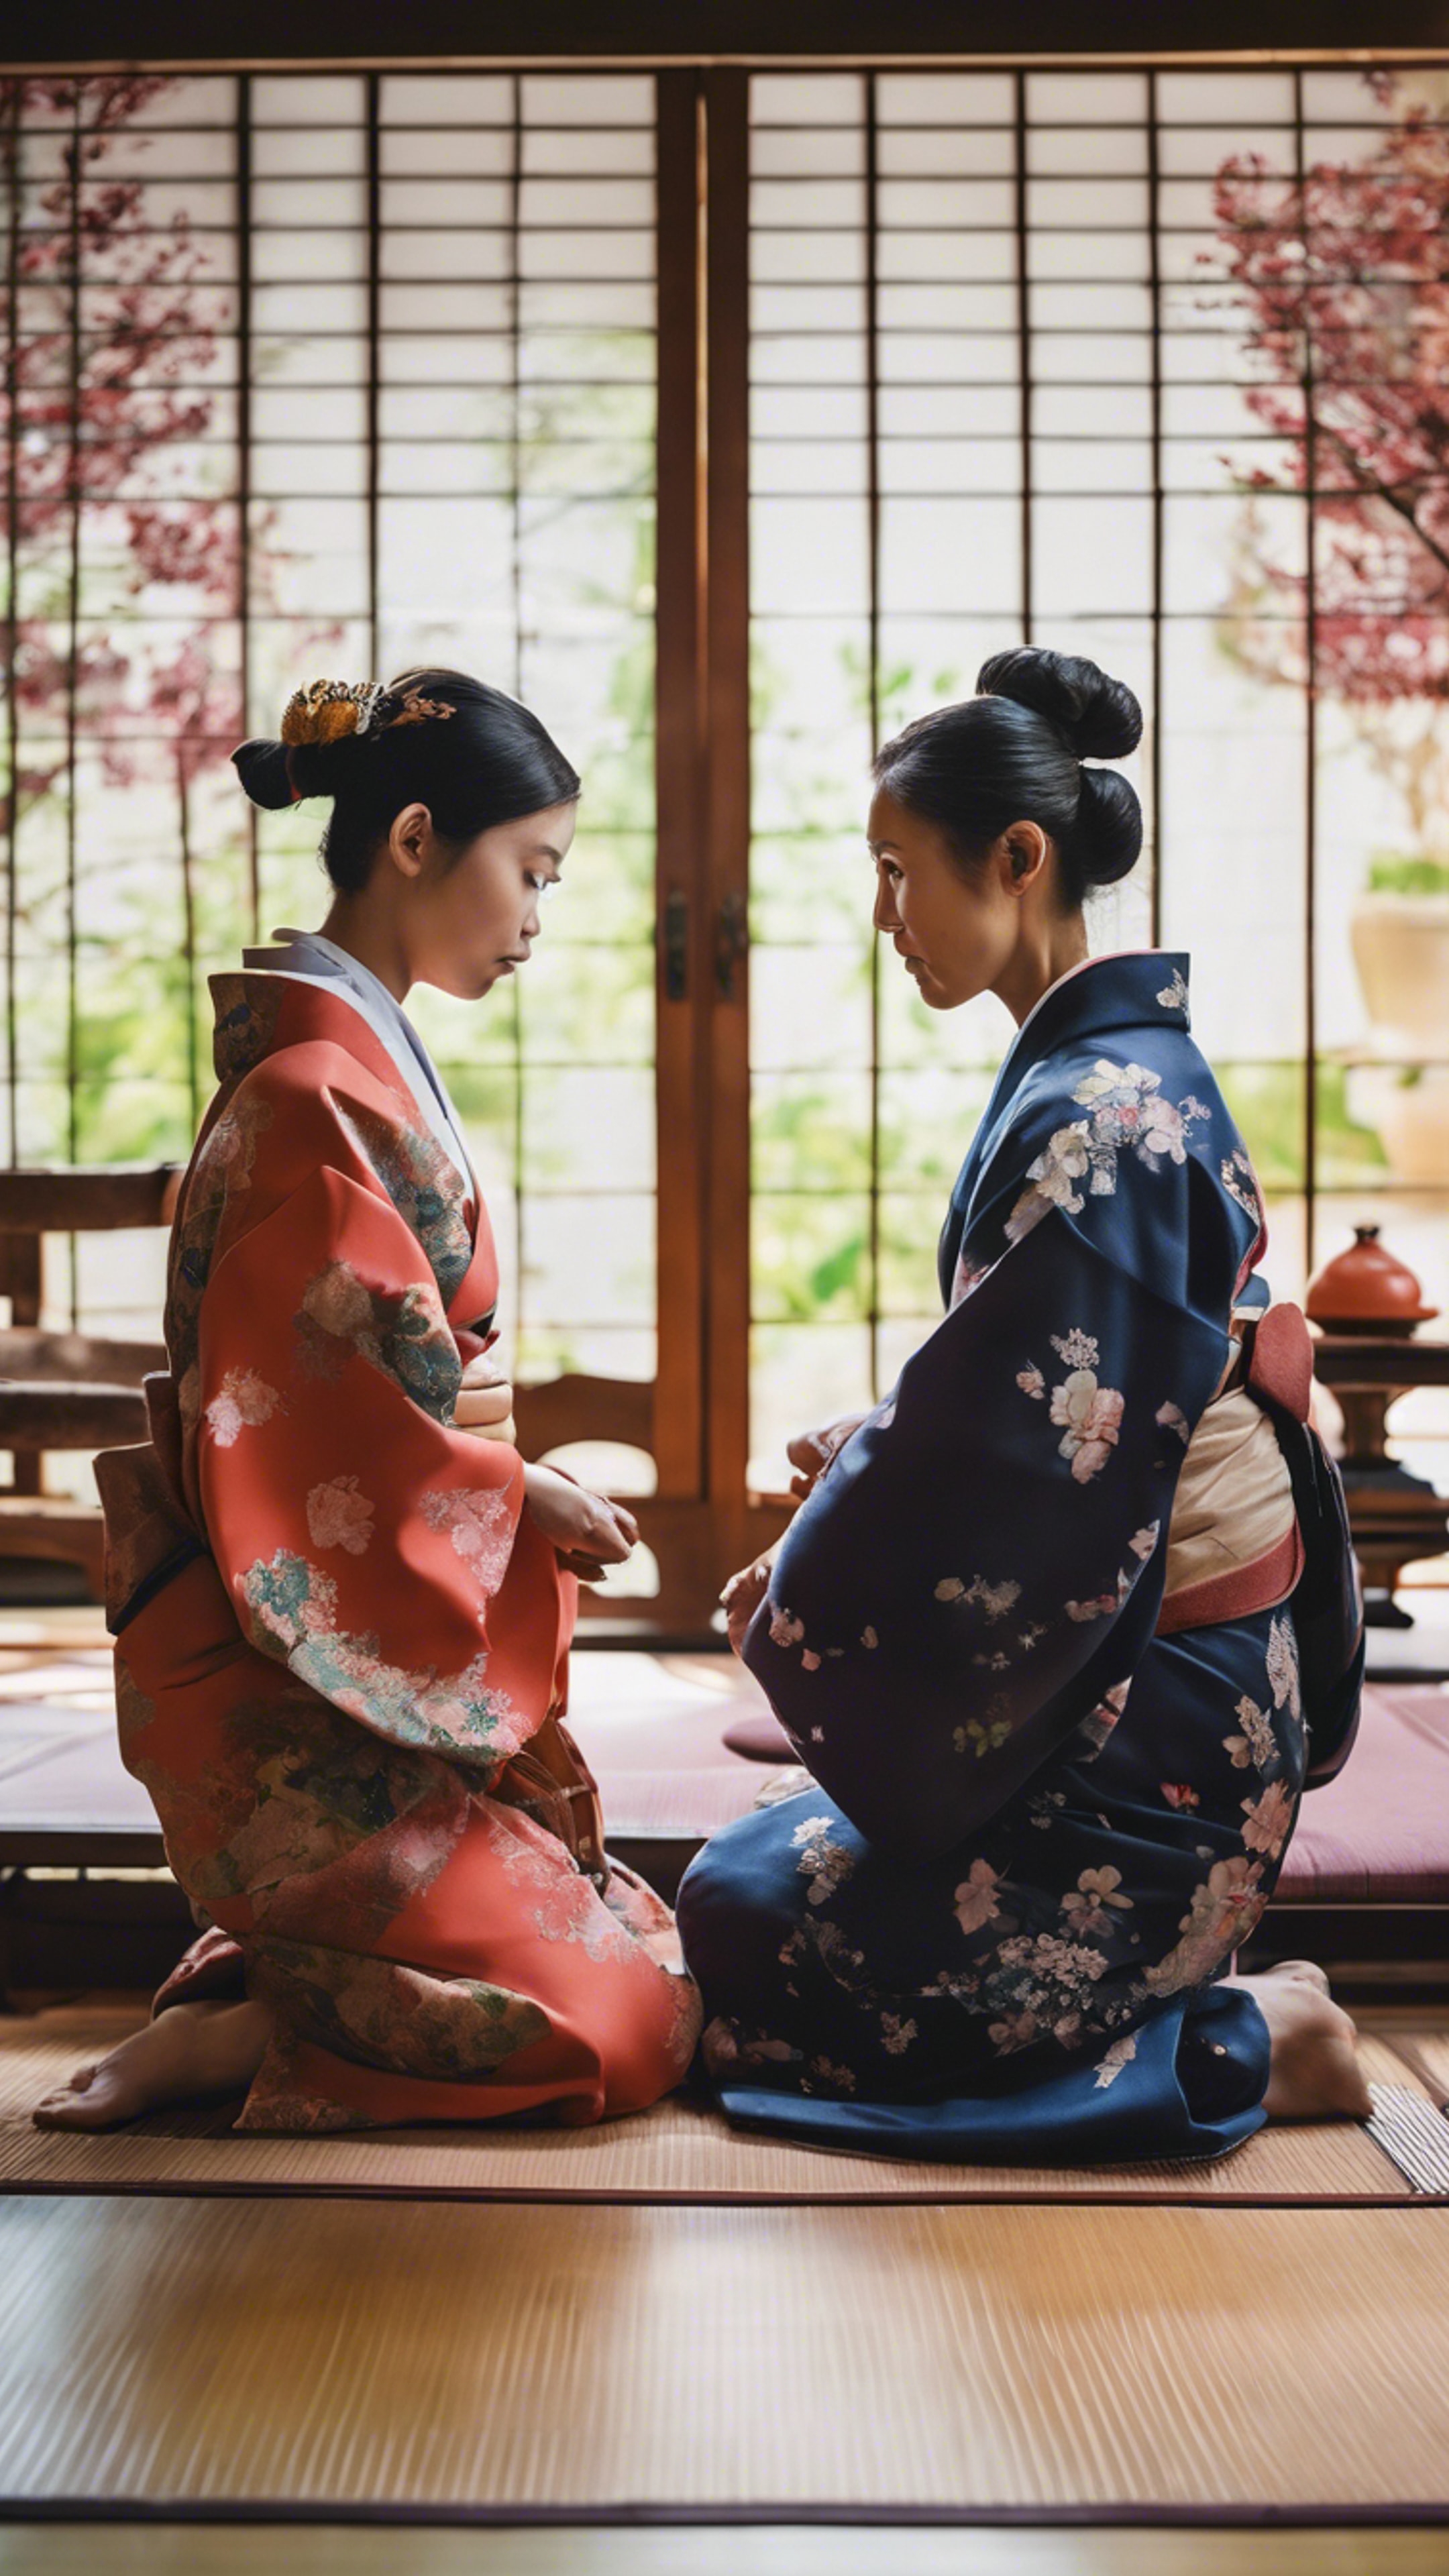 A young girl and her grandmother attending a Japanese tea ceremony, both wearing vibrant kimonos, lost in deep concentration.壁紙[e3fe20f234634e71b2cc]